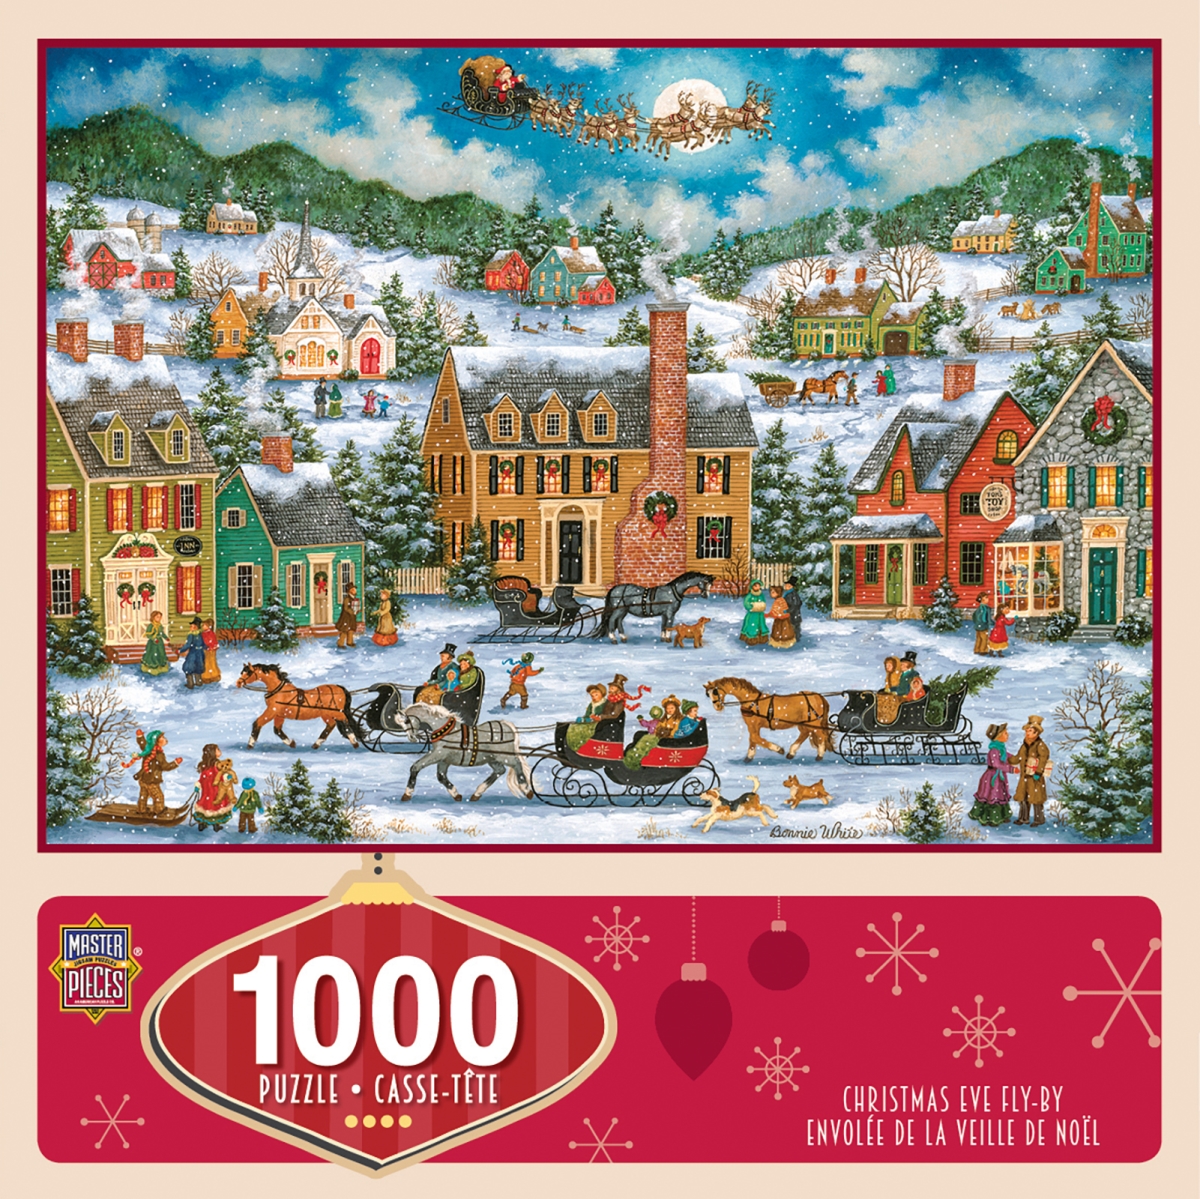 71773 19.25 X 26.75 In. Bonnie White Holiday Christmas Eve Fly By Jigsaw Puzzle - 1000 Piece